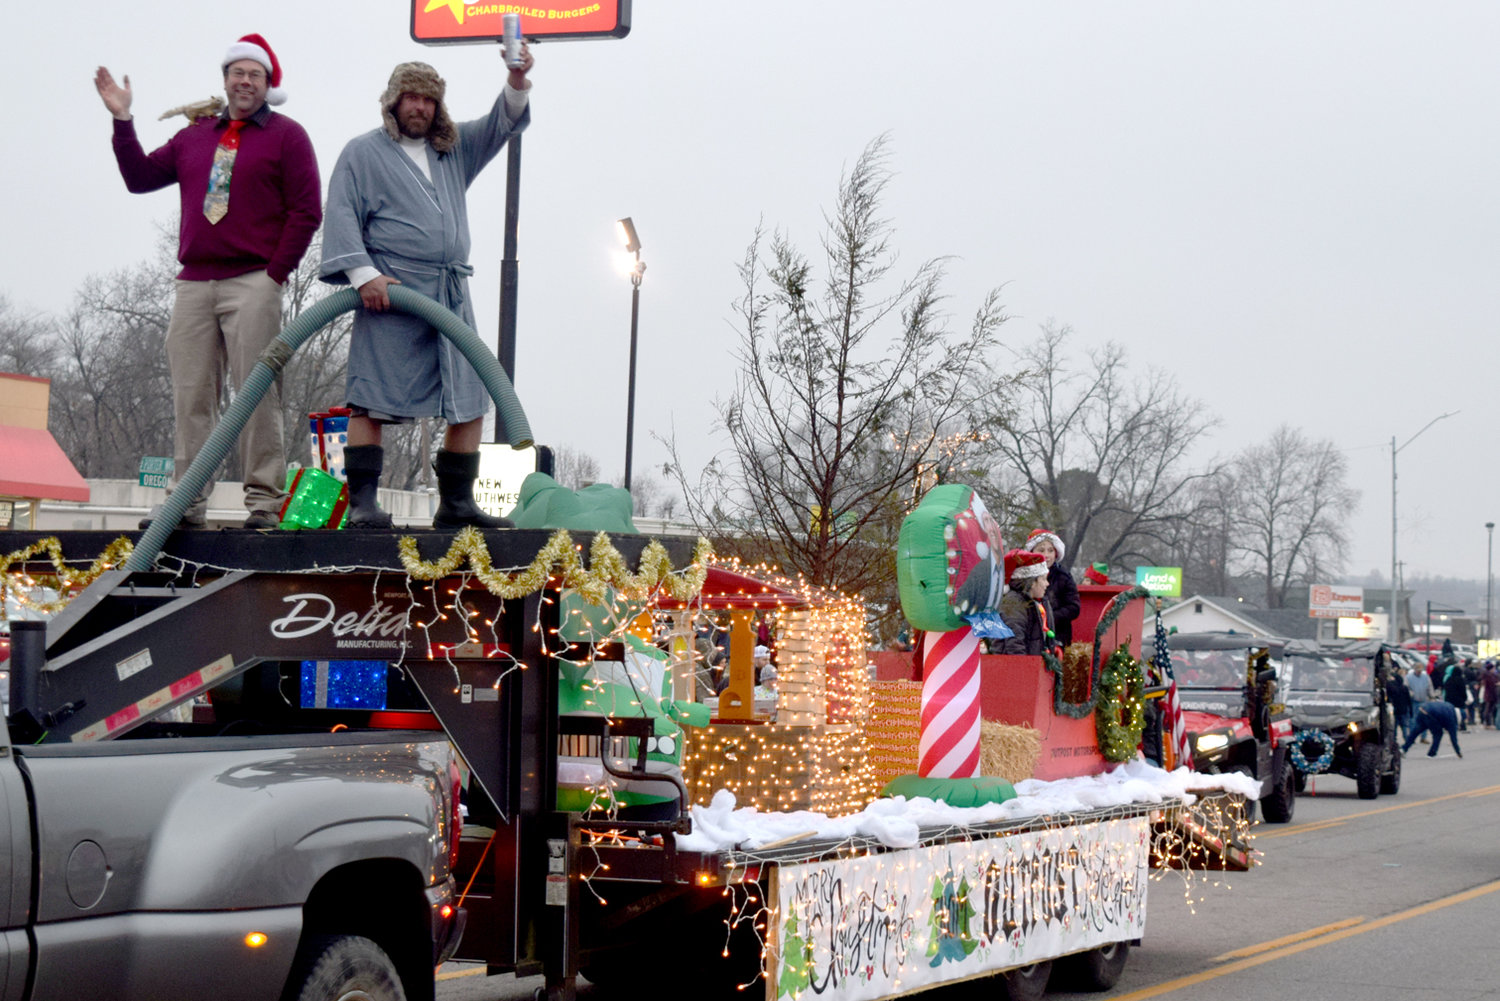 Hollywood Christmas moves through West Plains with annual parade West